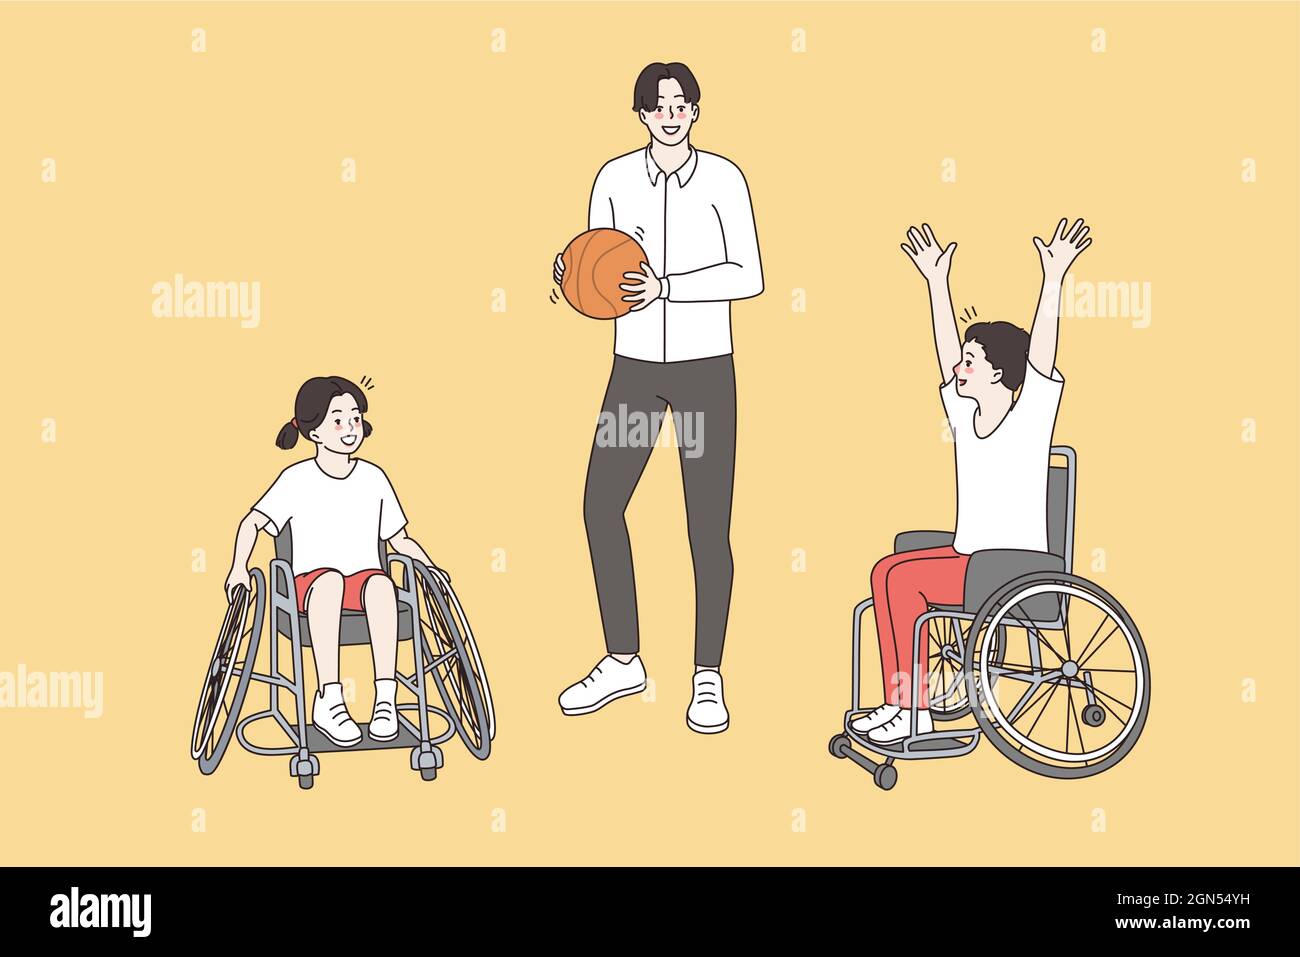 Happy active lifestyle of disabled children concept. Young smiling coach man standing with ball near disabled children on wheelchairs sitting waiting for game vector illustration  Stock Vector